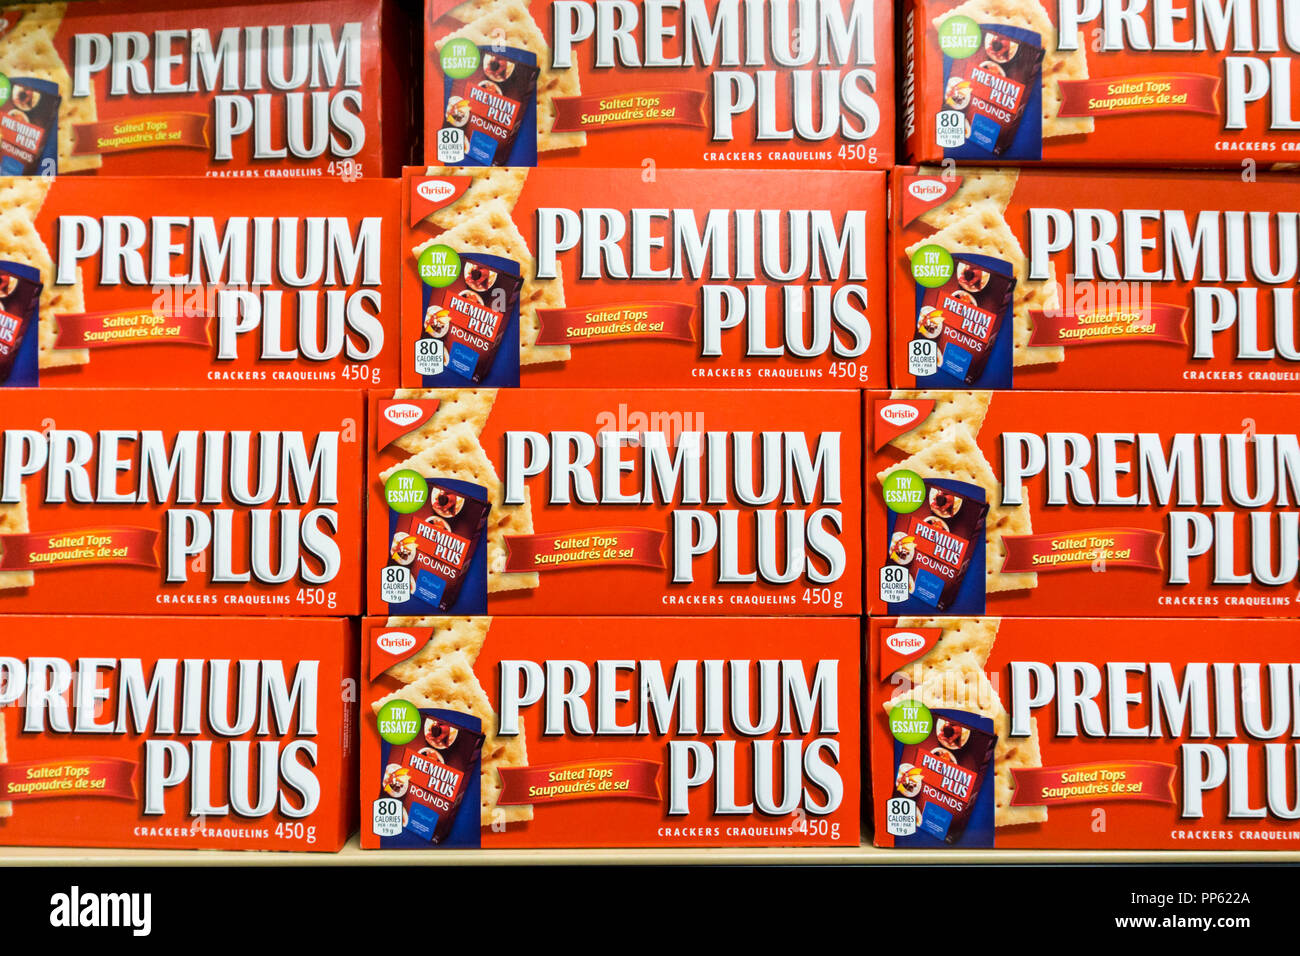 Boxes of Premium Plus crackers for sale on a supermarket shelf. Stock Photo